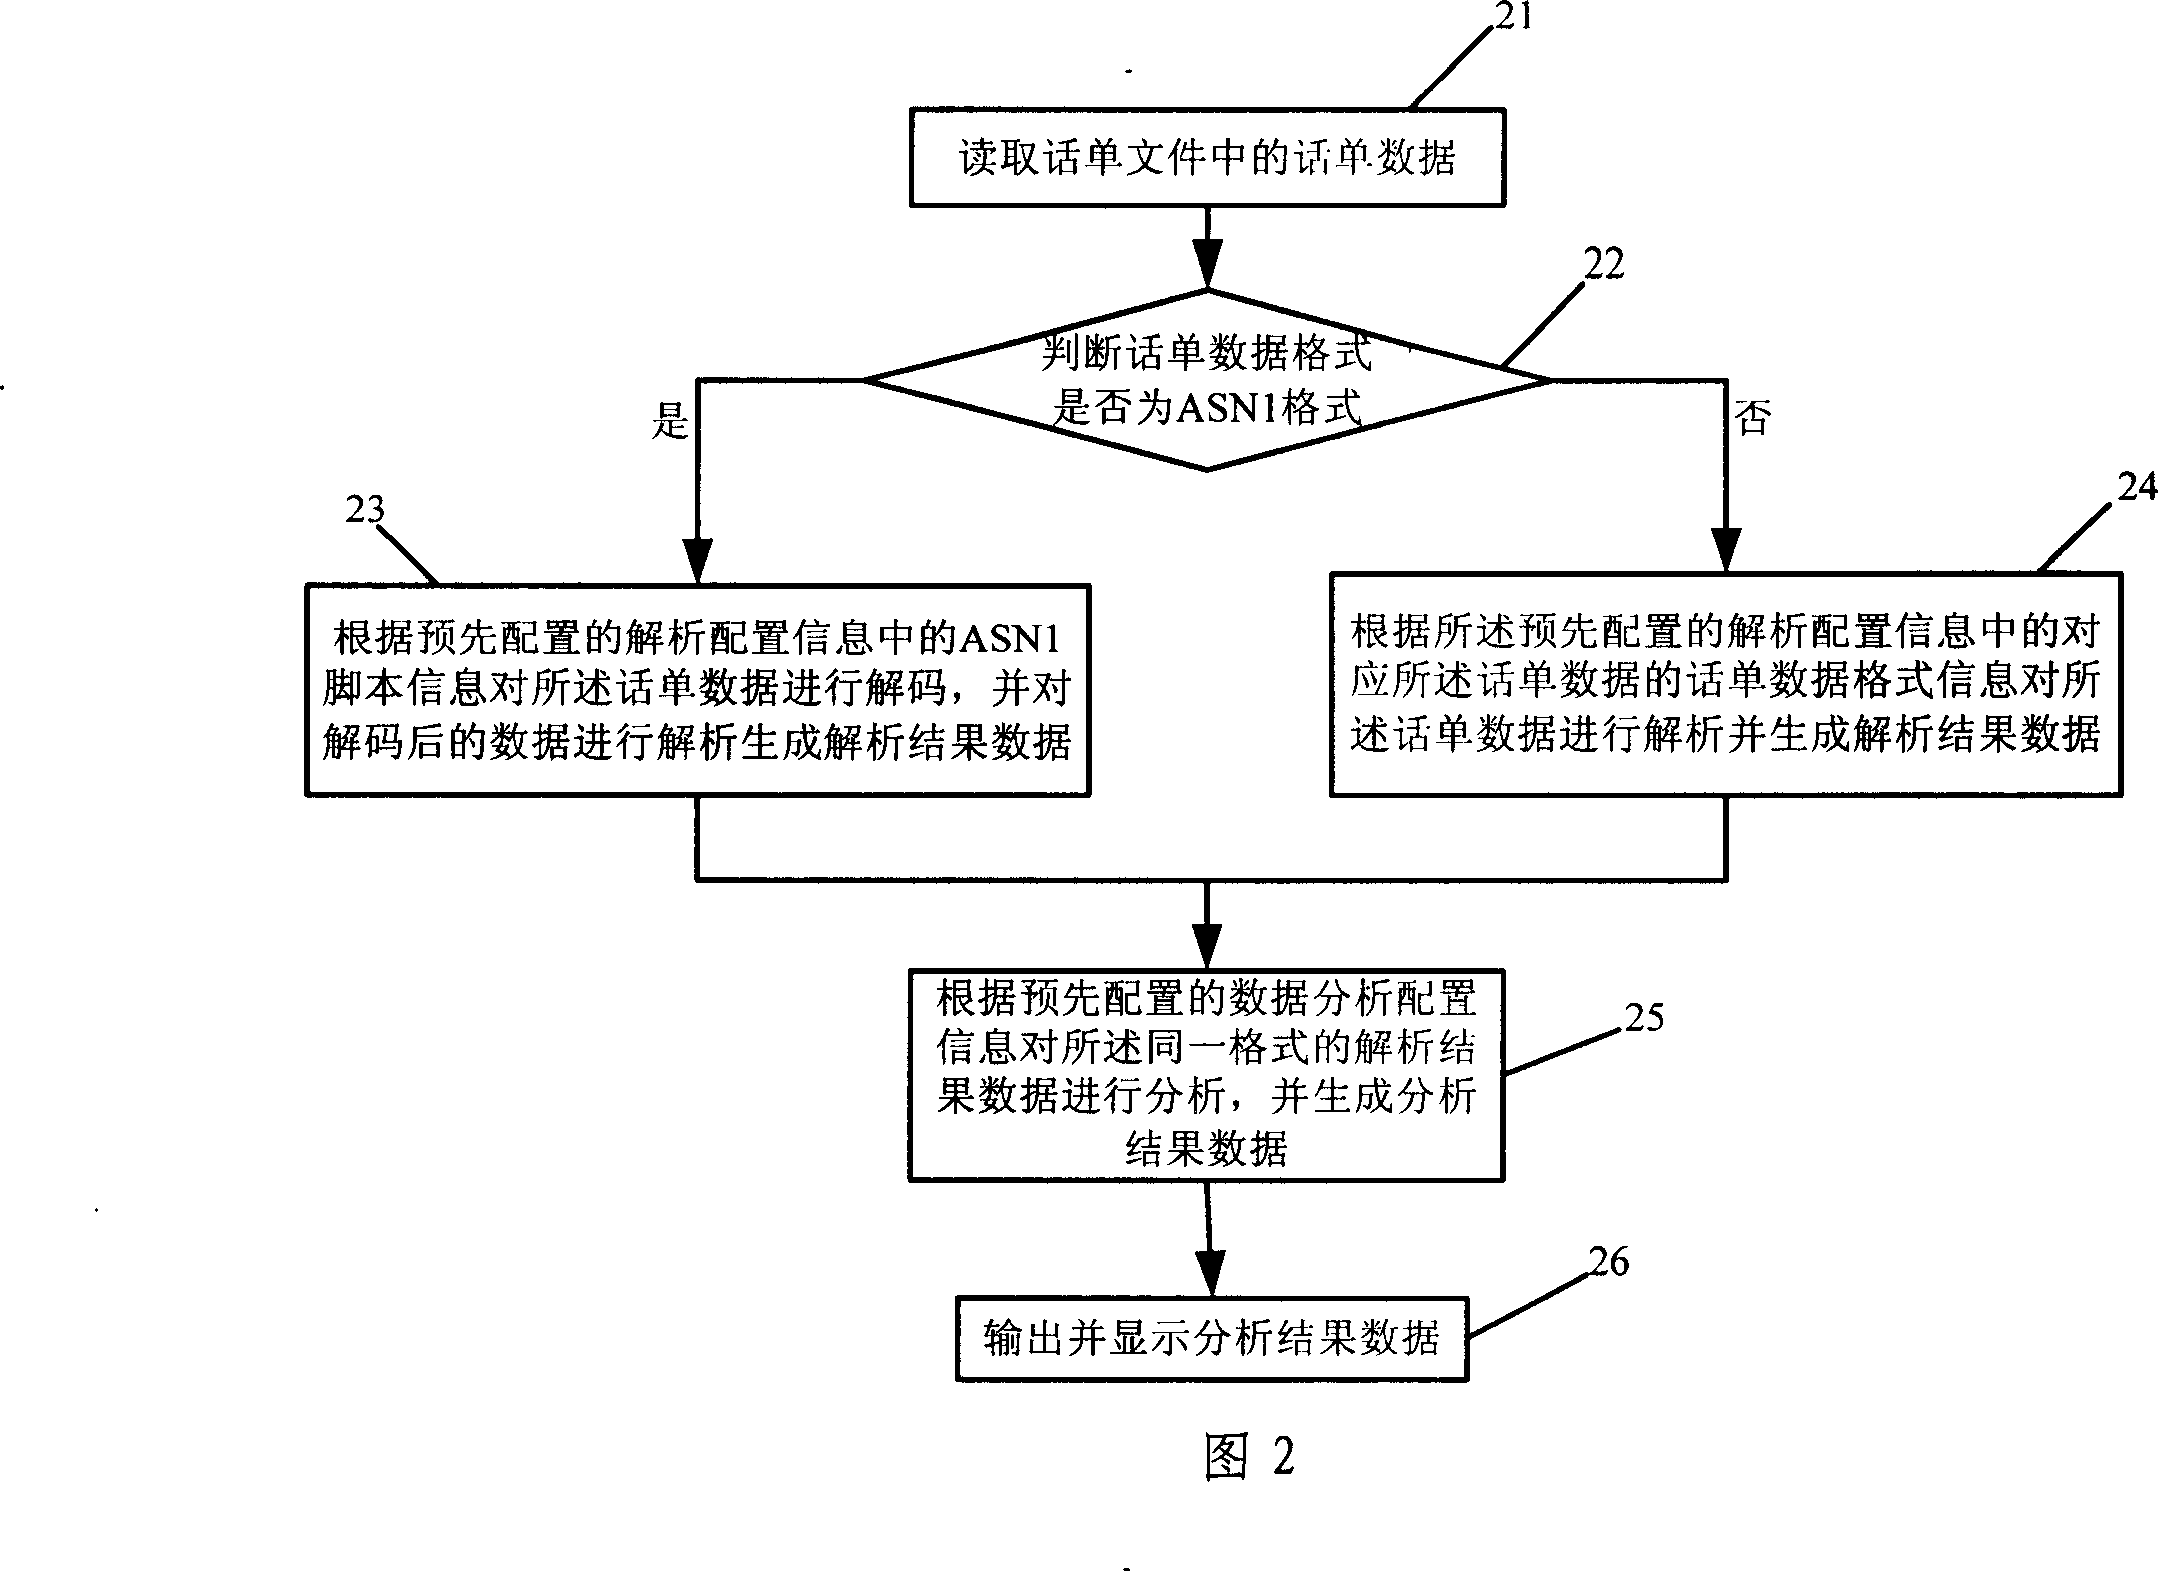 Tollticket processing equipment and method